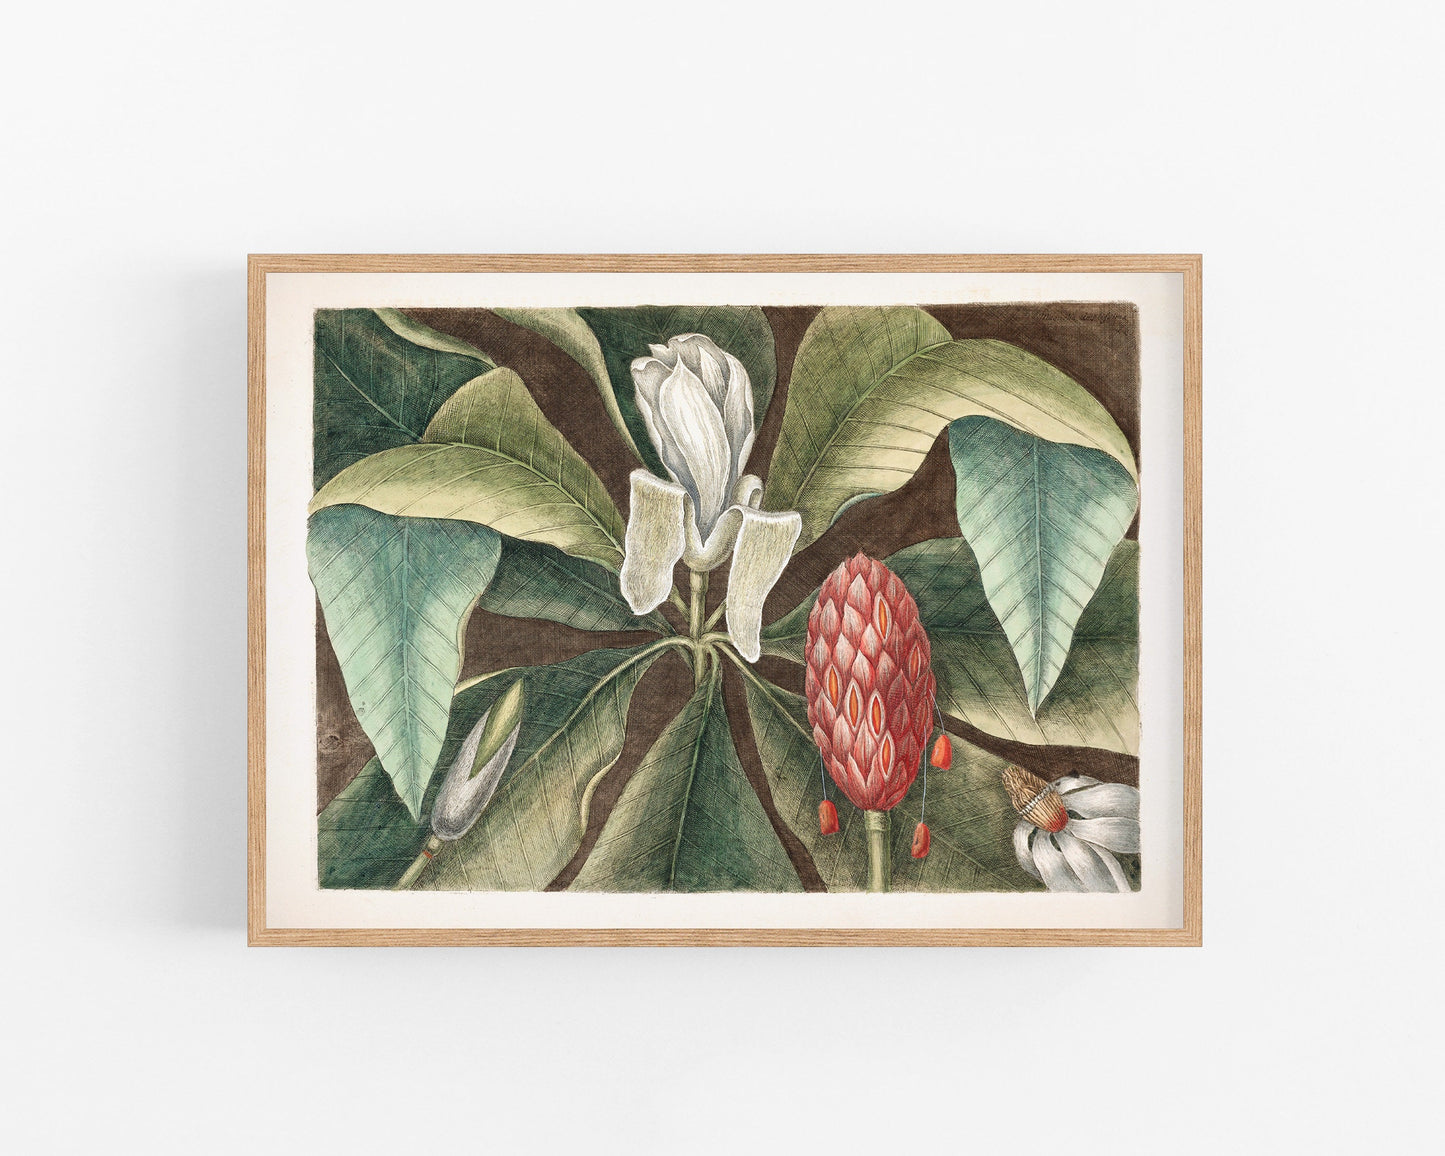 Antique magnolia tree art | 18th century Mark Catesby | Natural history illustration | Modern vintage décor | Eco-friendly gift